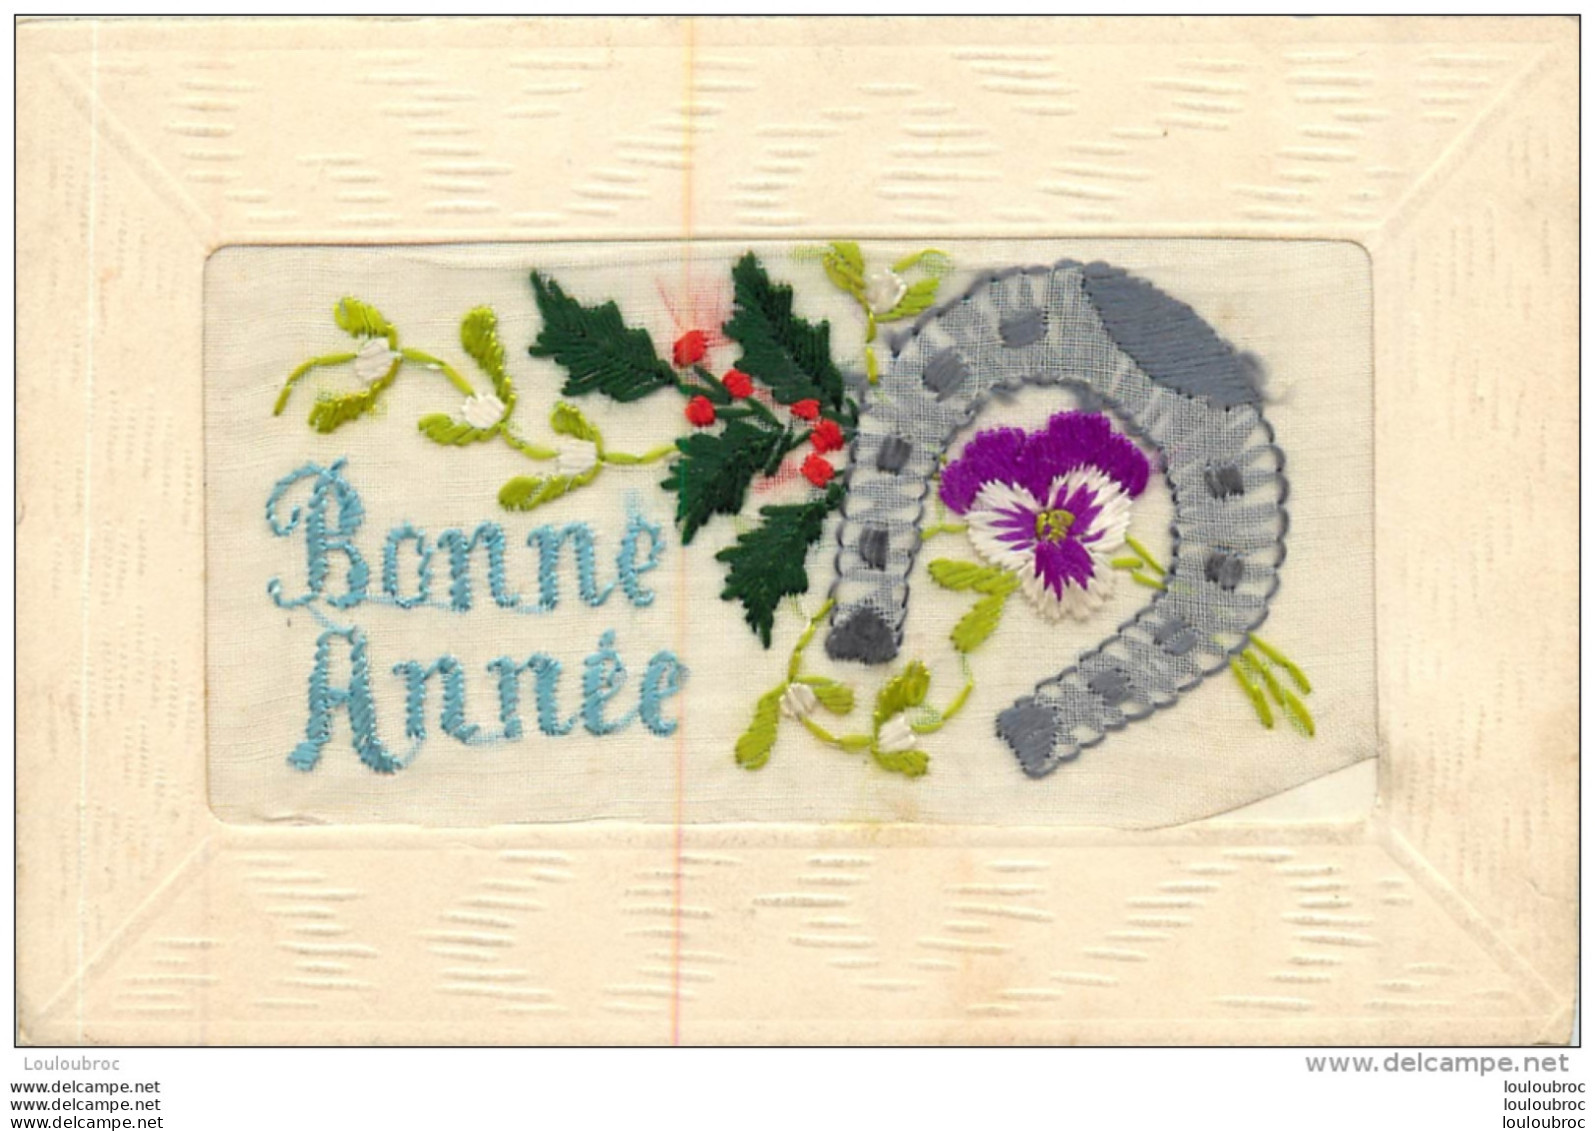 CARTE BRODEE HOUX ET FER A CHEVAL BONNE ANNEE - Embroidered